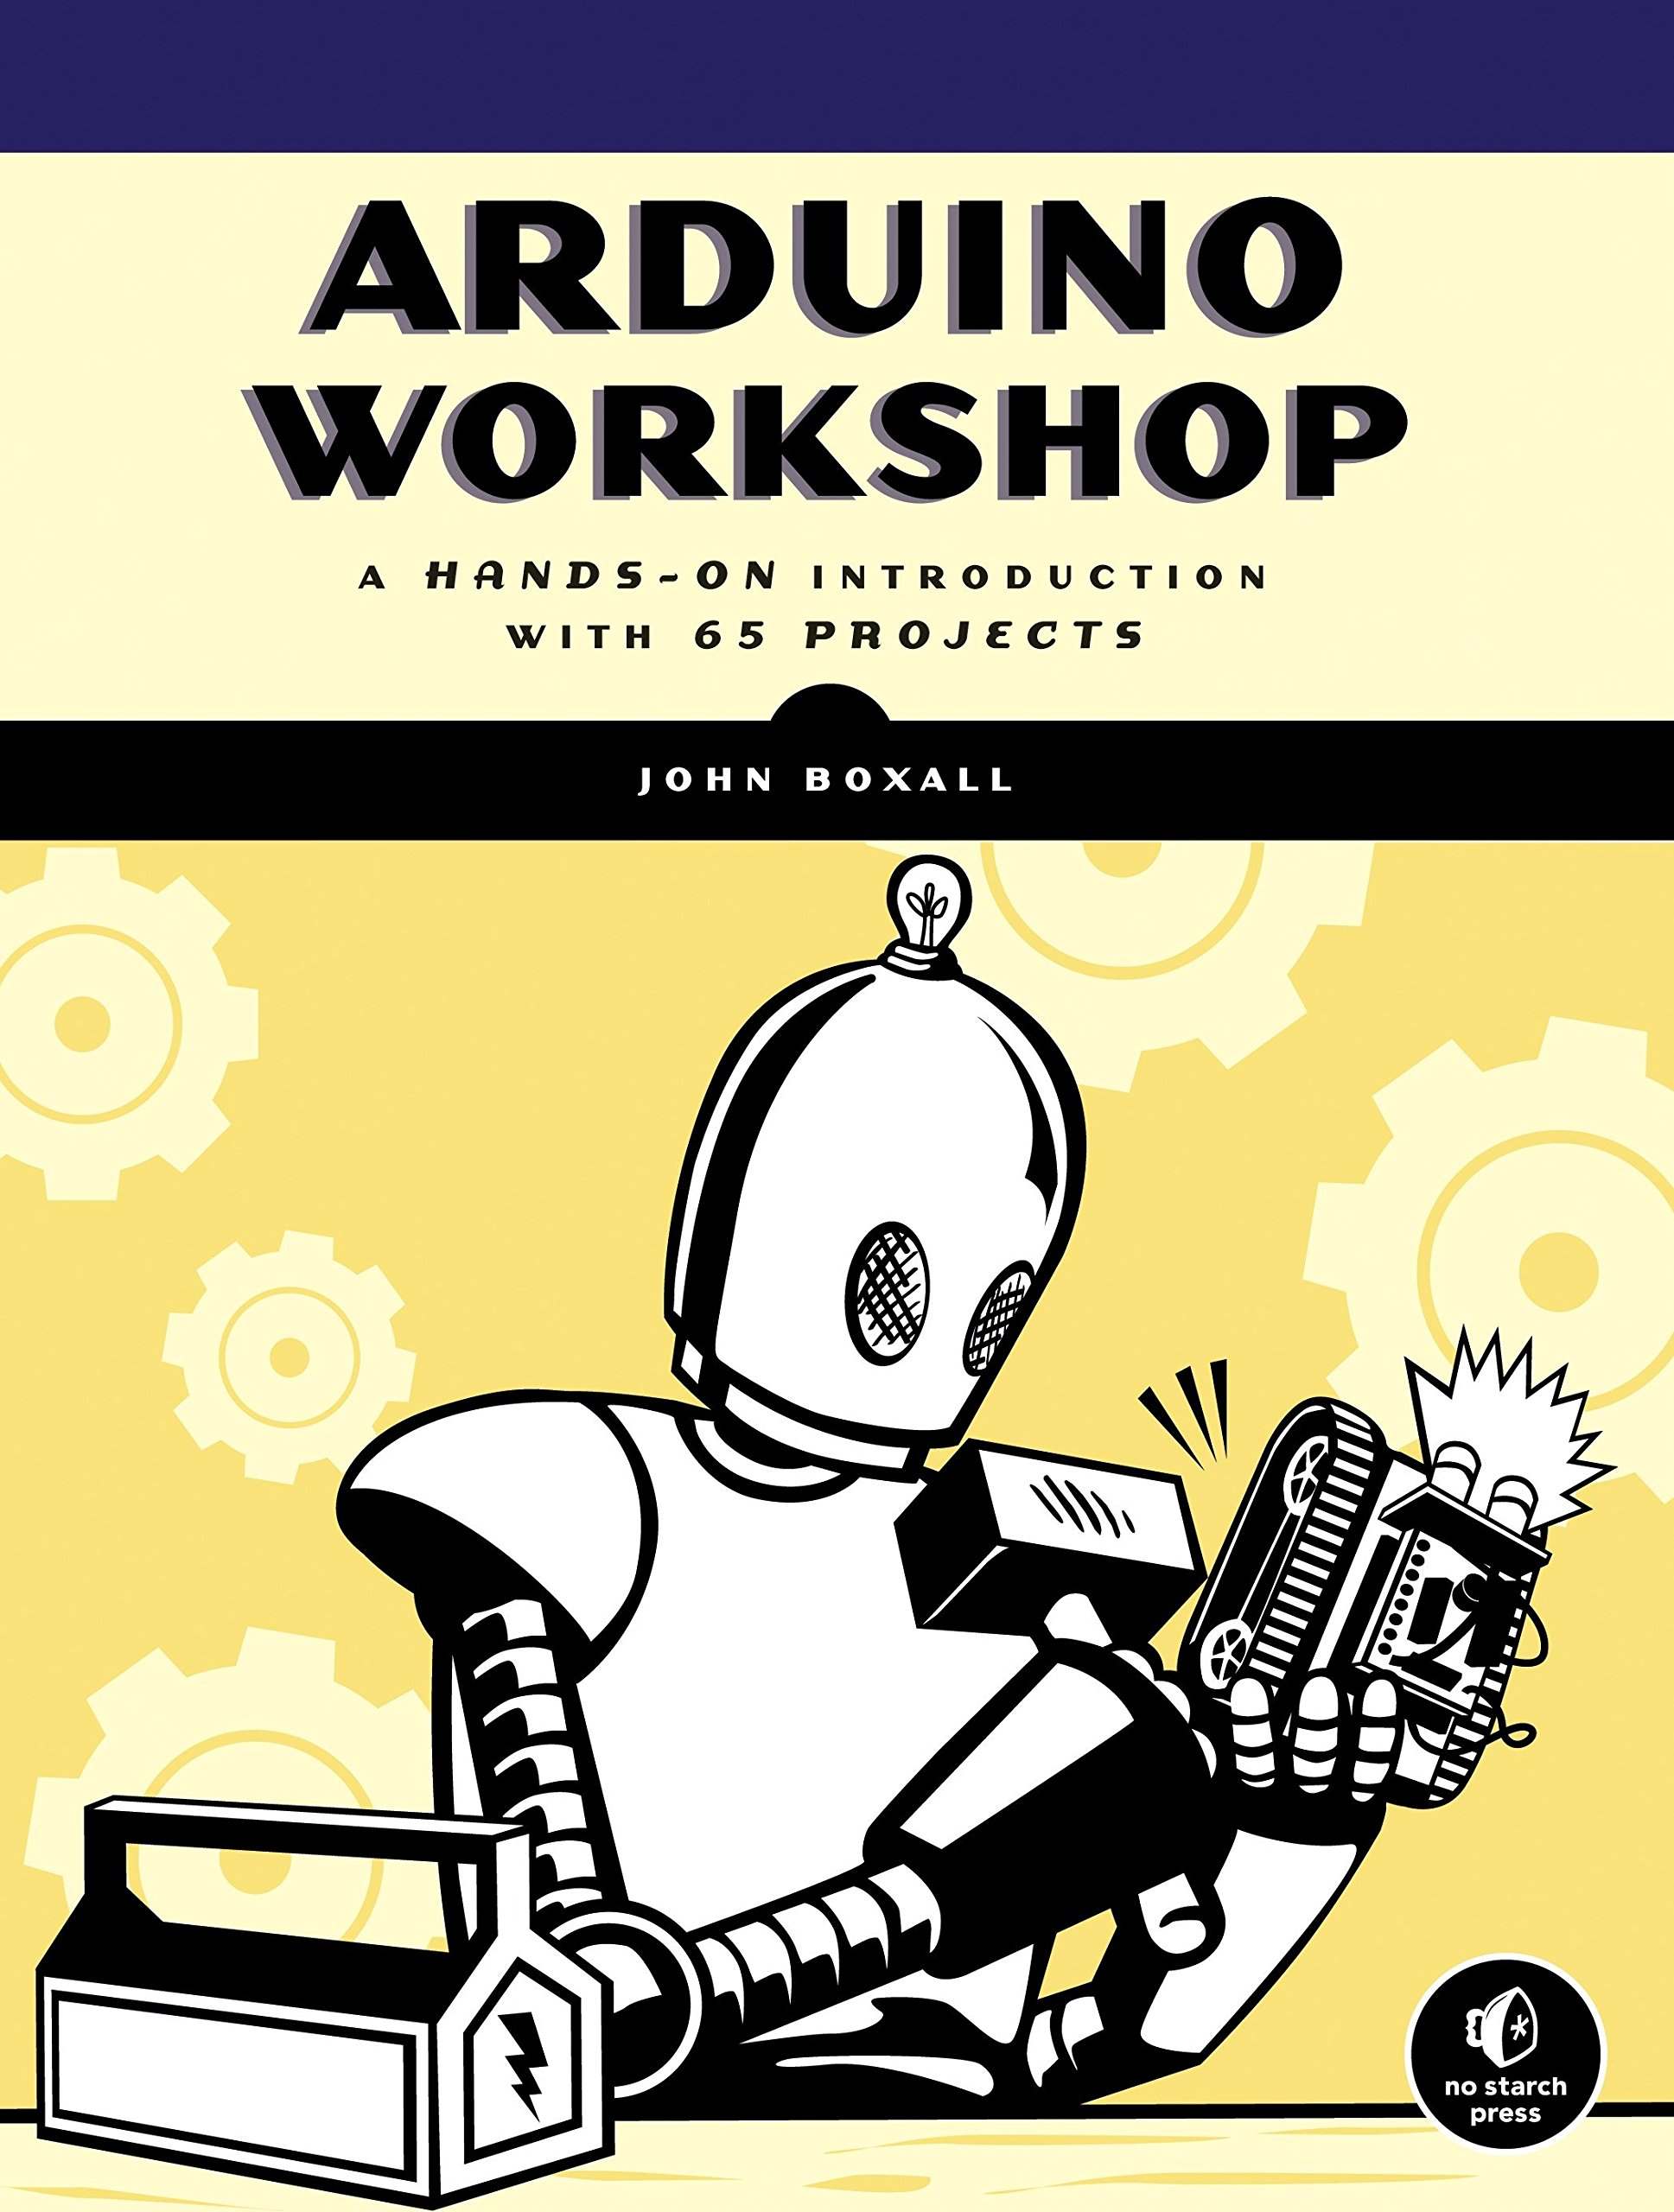 Best Book to Get Started with Arduinos